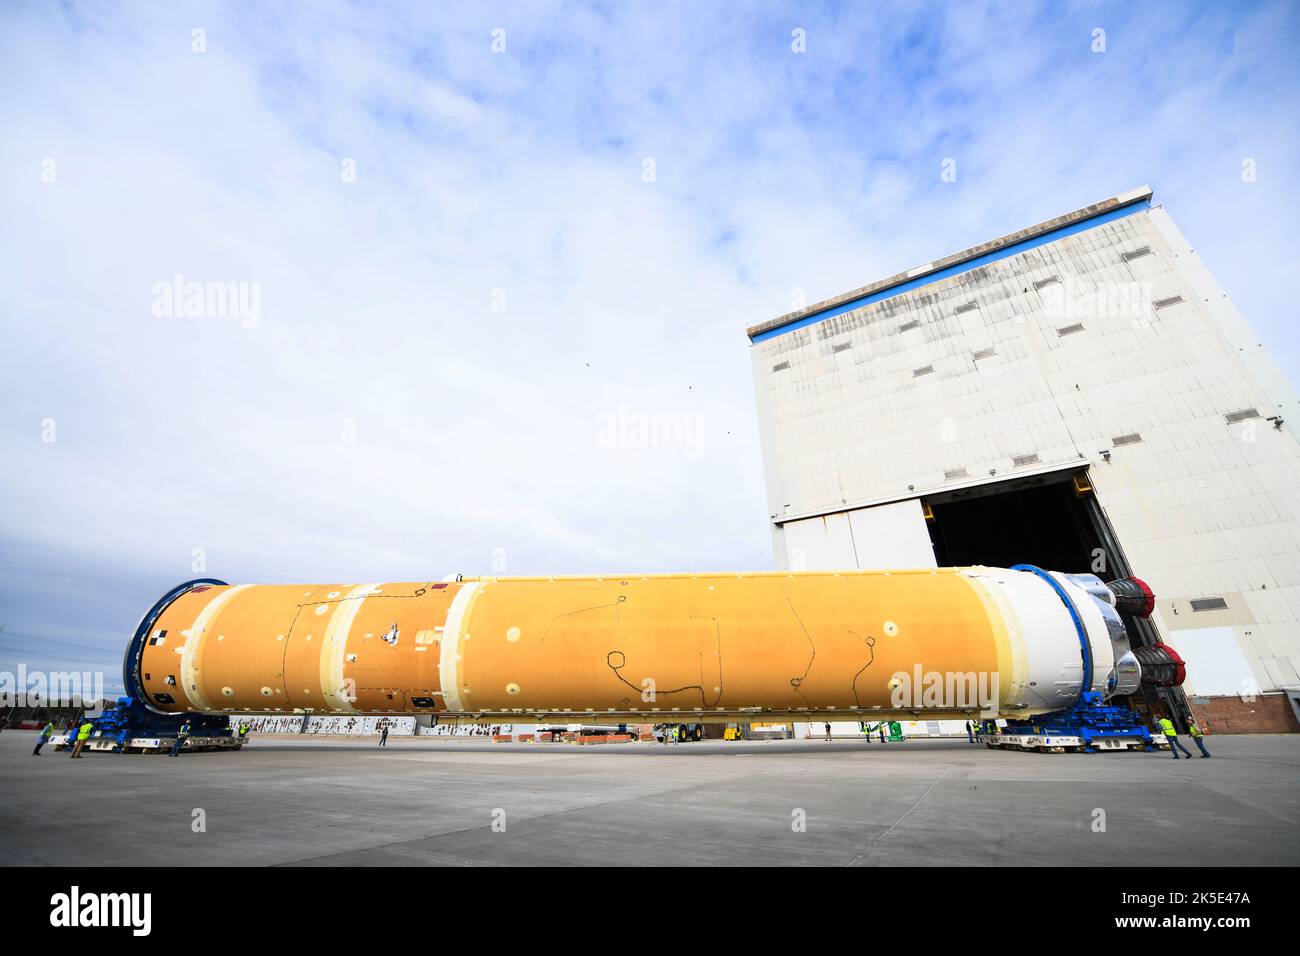 Teams at NASA's Michoud Assembly Facility in New Orleans moved the core stage, complete with all four RS-25 engines, for NASA's Space Launch System (SLS) rocket to Building 110 for final shipping preparations on 1 January 2020. The SLS core stage includes state-of-the-art avionics, propulsion systems and two colossal propellant tanks that collectively hold 733,000 gallons of liquid oxygen and liquid hydrogen to power its four RS-25 engines. The completed stage help power the first Artemis mission to the Moon An optimised version of an original NASA image. Credit: NASA/JGuidry Stock Photo